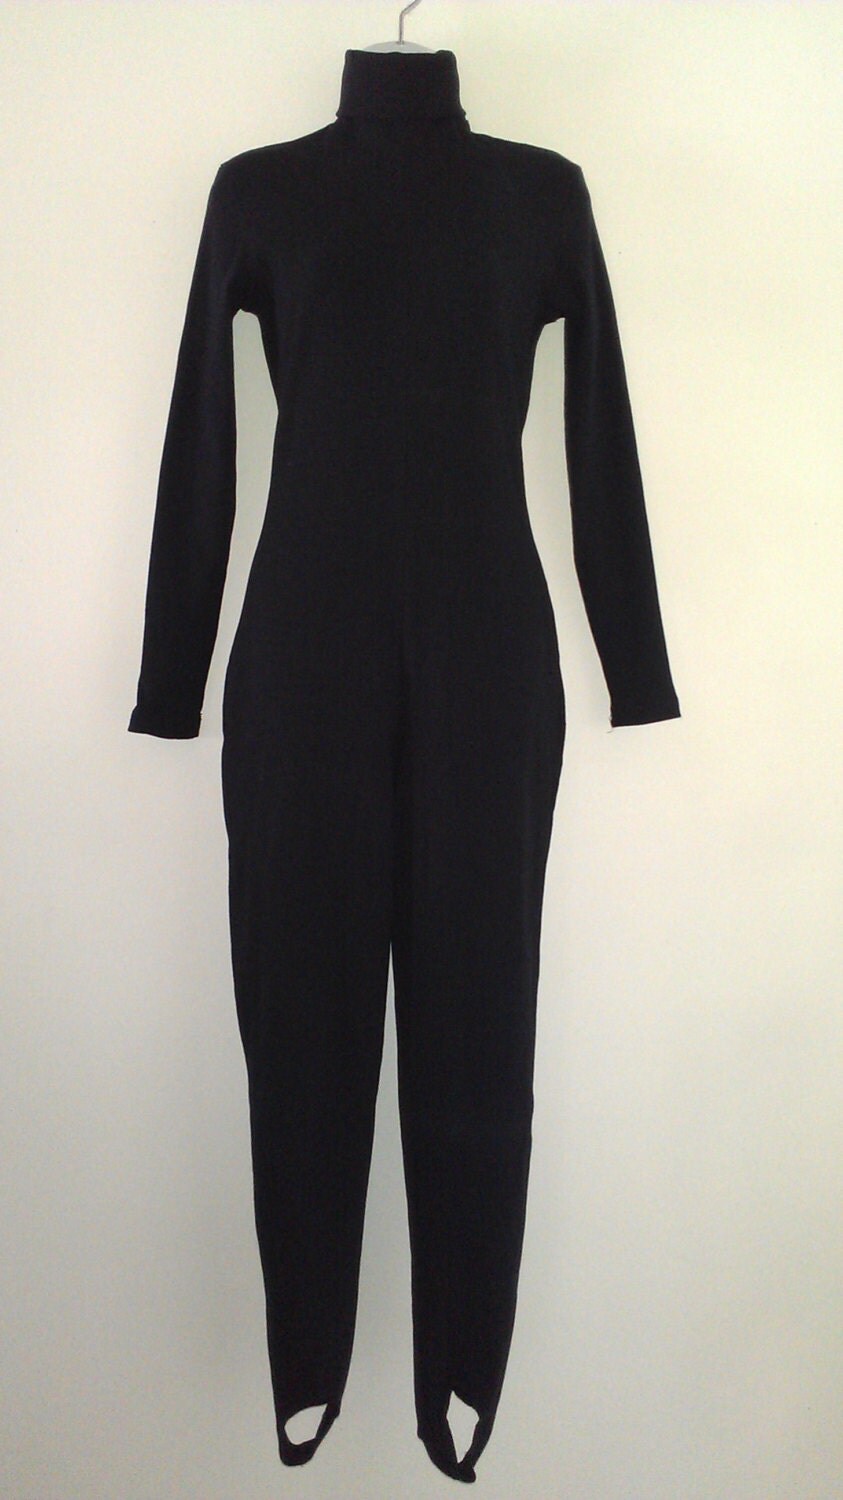 Vintage 80s Black Stirrup Catsuit-Jumpsuit by by ThriftyGirlsRock